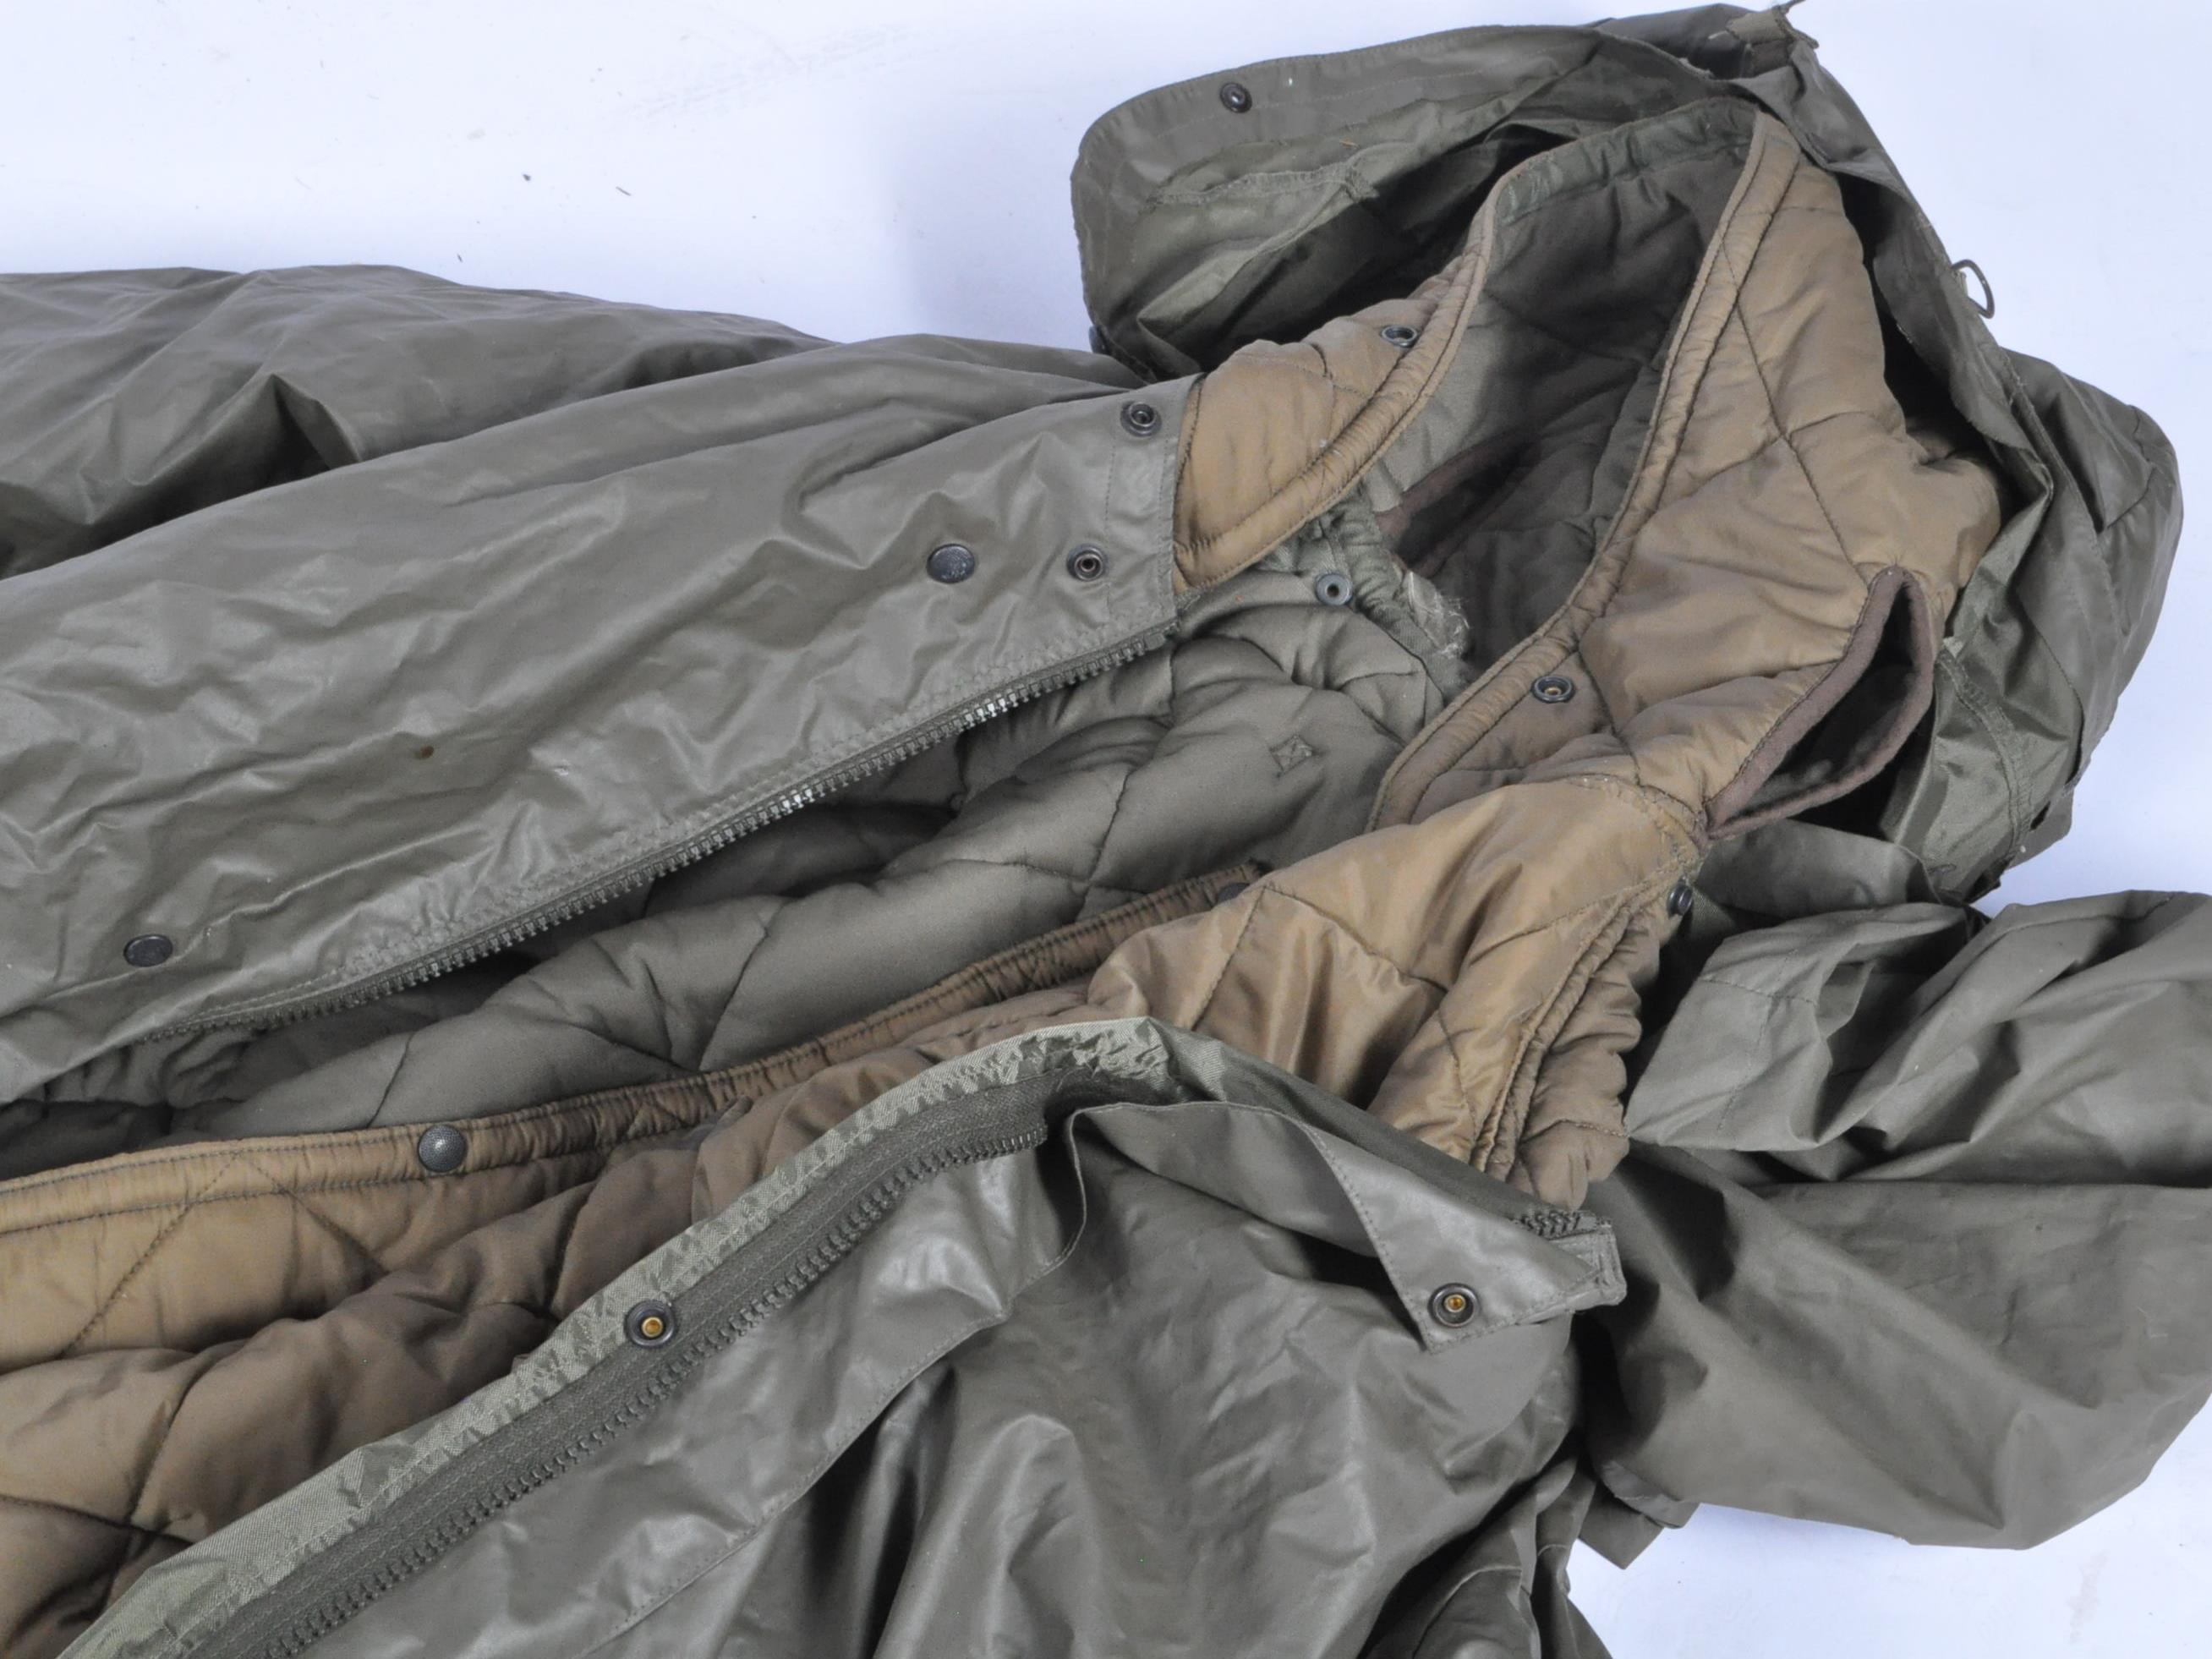 20TH CENTURY GERMAN SPECIAL FORCES / SNIPER'S LAY UP BAG - Image 4 of 6